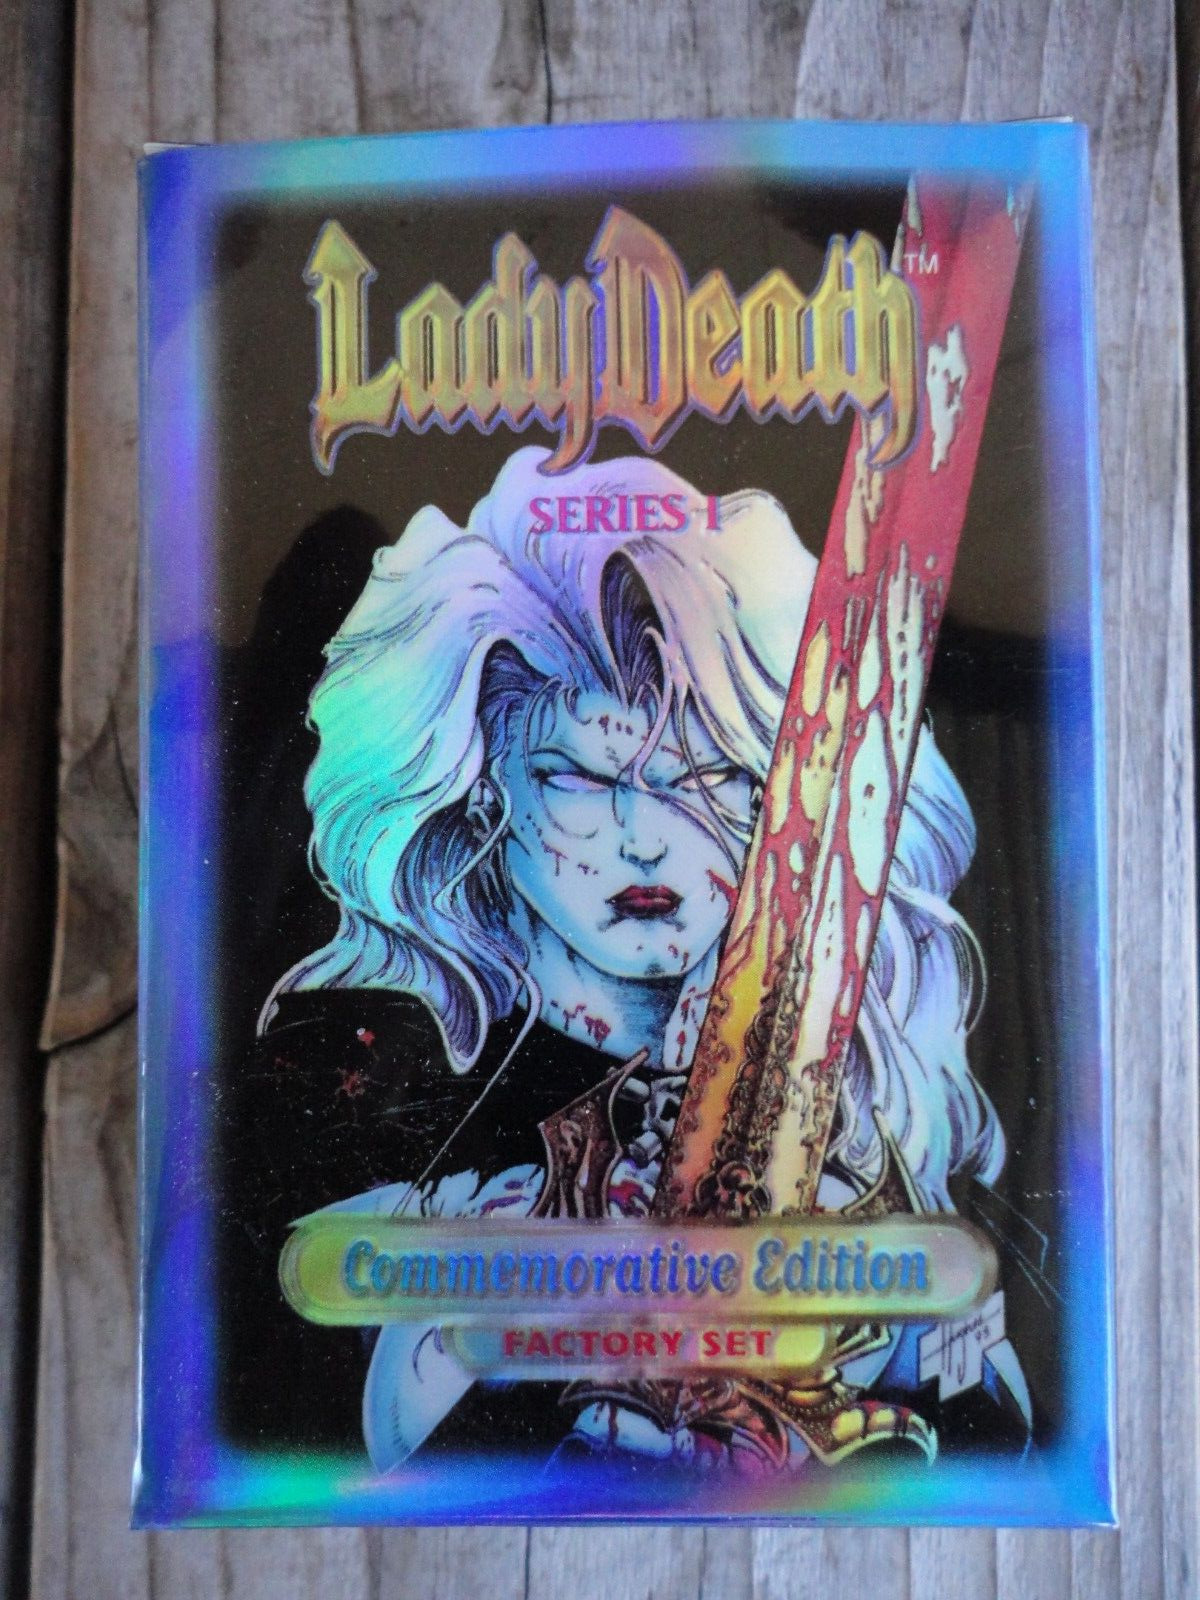 LADY DEATH SERIES 1 Commemorative Edition FACTORY CARD SET with Chase Cards